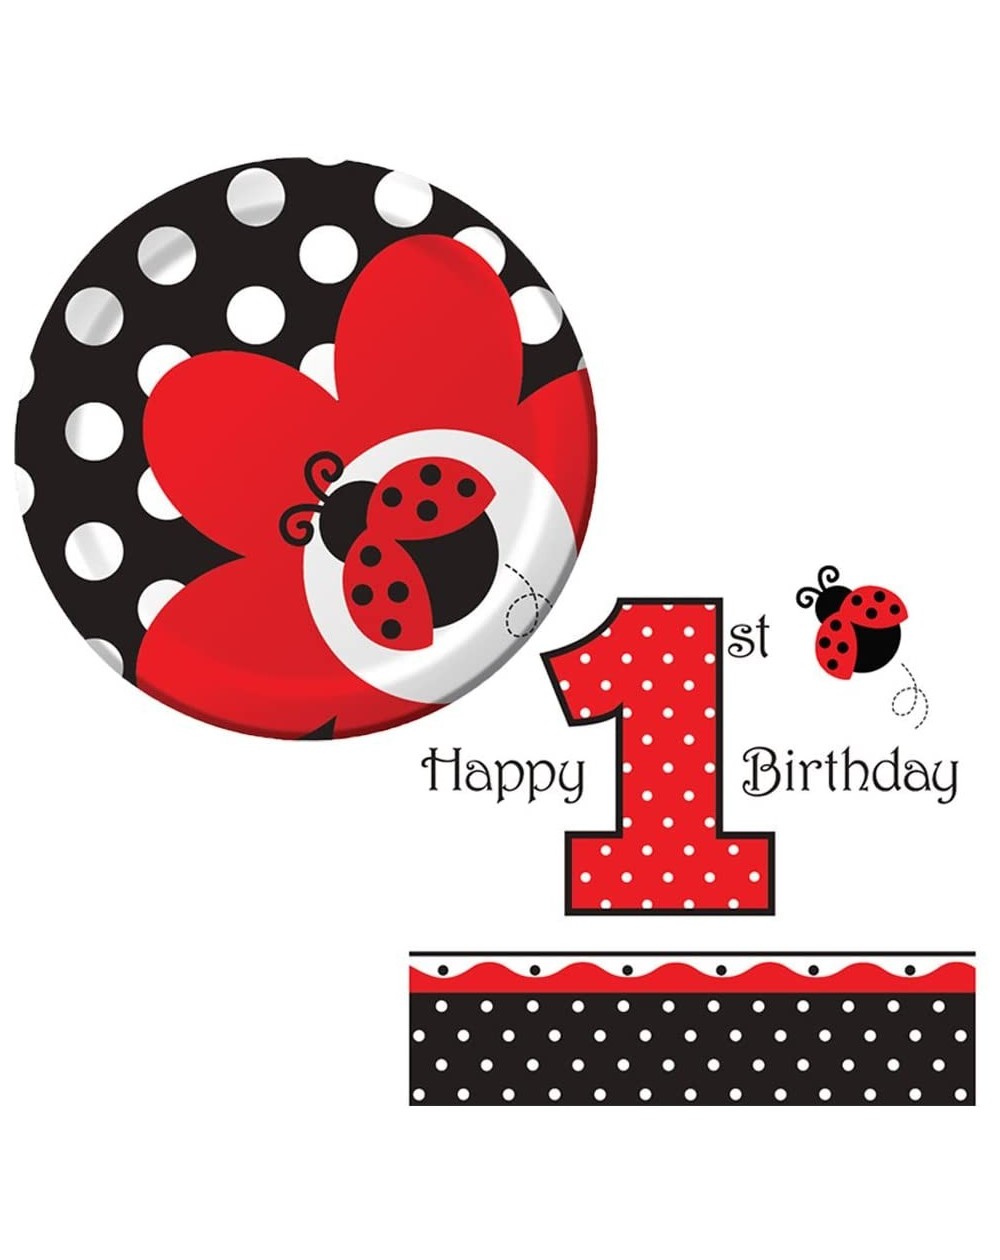 Party Packs Ladybug Fancy Birthday Party Supplies Pack 16 Guests - 16 Paper Dessert Plates and 16 Paper Beverage Napkins - Ad...